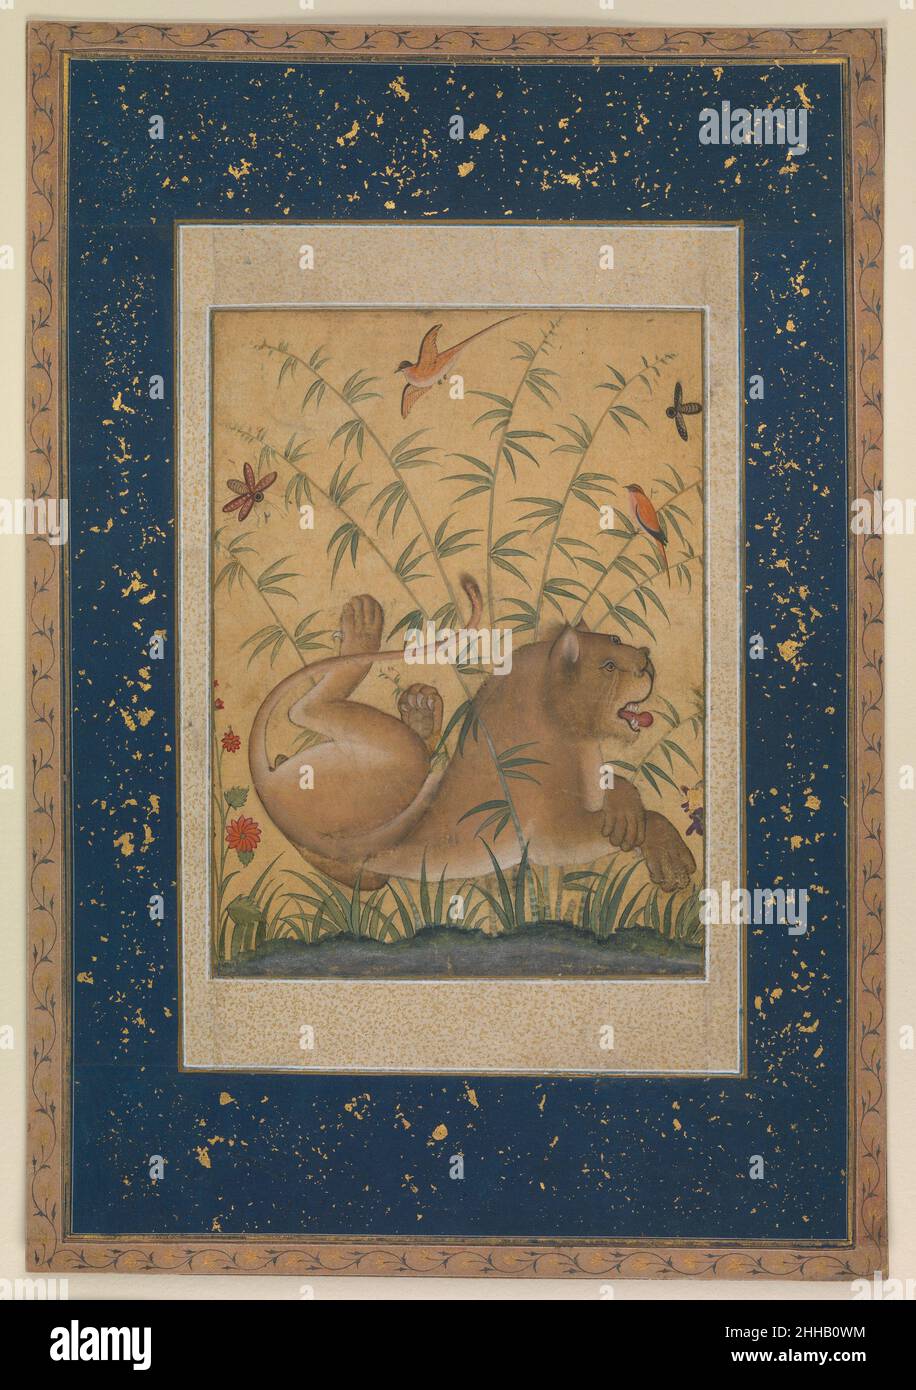 Lion at Rest ca. 1585 The Mughals had a great predilection for Indian fauna. Muraqqa (single-page) paintings with animal portraiture developed into a separate genre during the Mughal period. For the Mughals, lions symbolized power and when accompanied by a lamb or calf signified the existence of peace and justice. This painting, one of the early works of Mansur, belongs to the period of Akbar and shows a resting lion reclining in the bulrushes besides the edge of a lake where birds perch and flit amidst the bamboo grove. The lion raises his hind legs while lightly crossing the fore paws in one Stock Photo